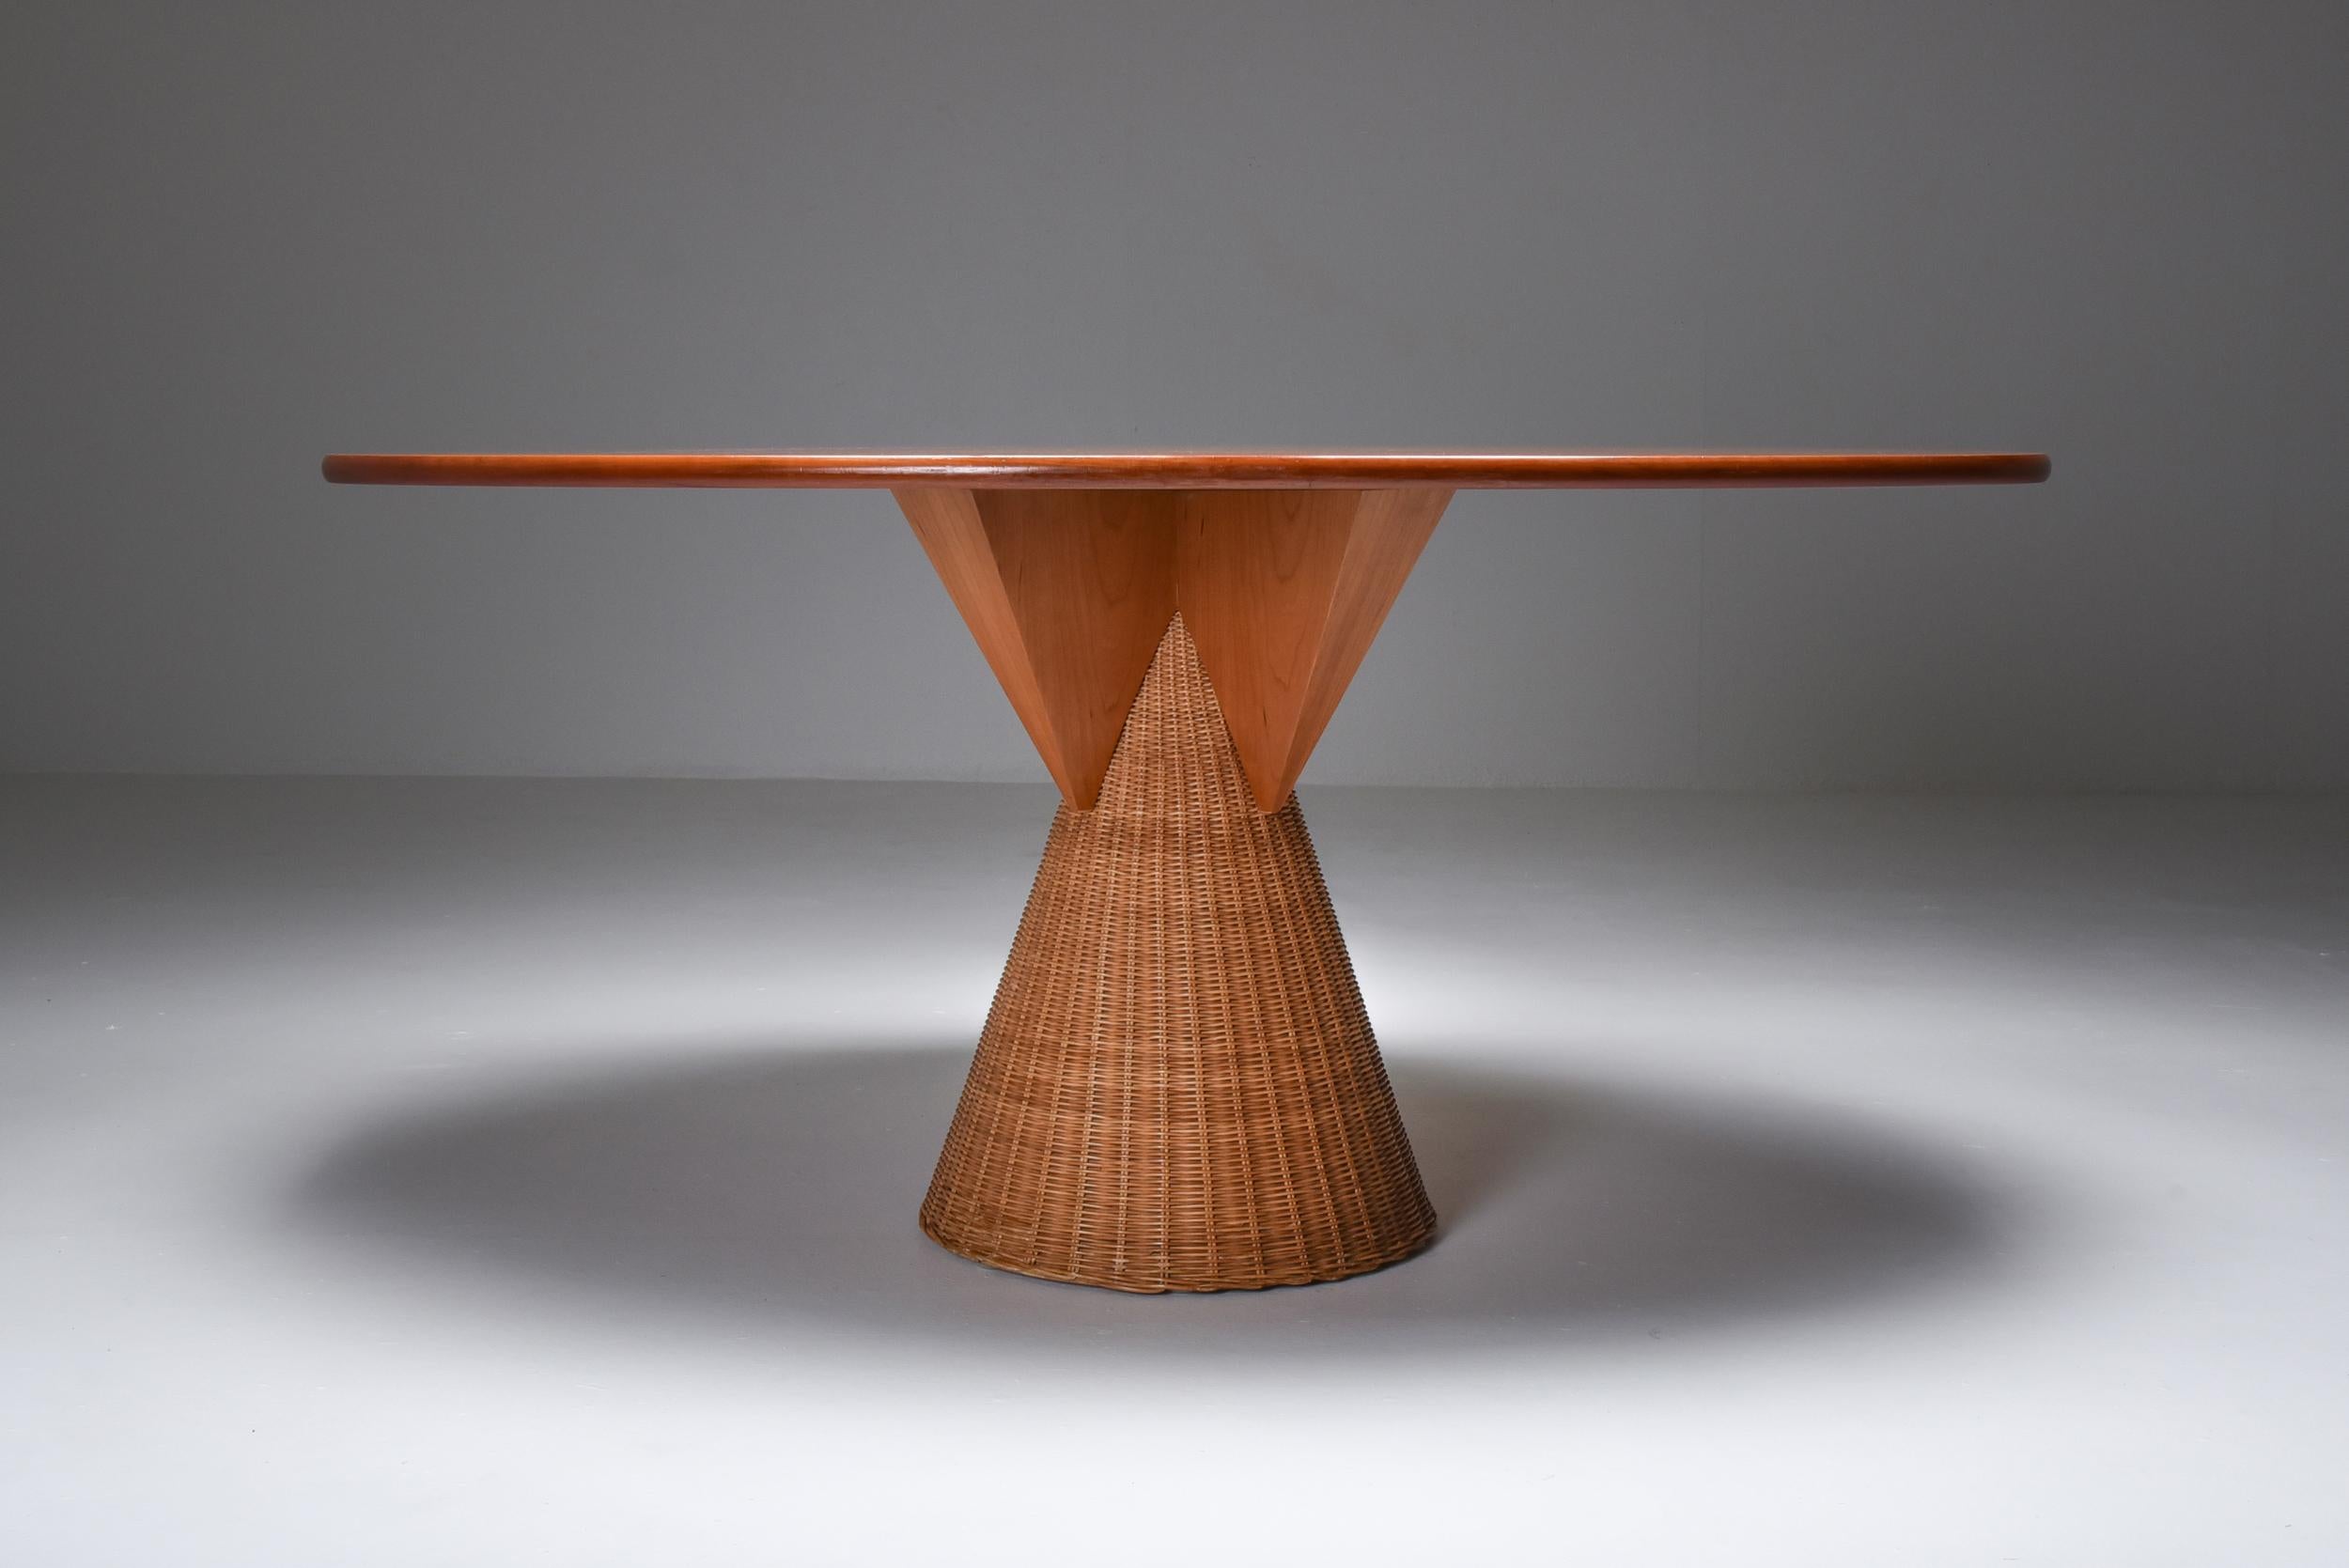 Oval dining table, cherry, rattan, post-modern, Bonacina, Italy 1970s

Interesting combination of materials make this an architectural piece which could fit in a variety of interiors.
The use of rattan or woven cane balances out the more hard